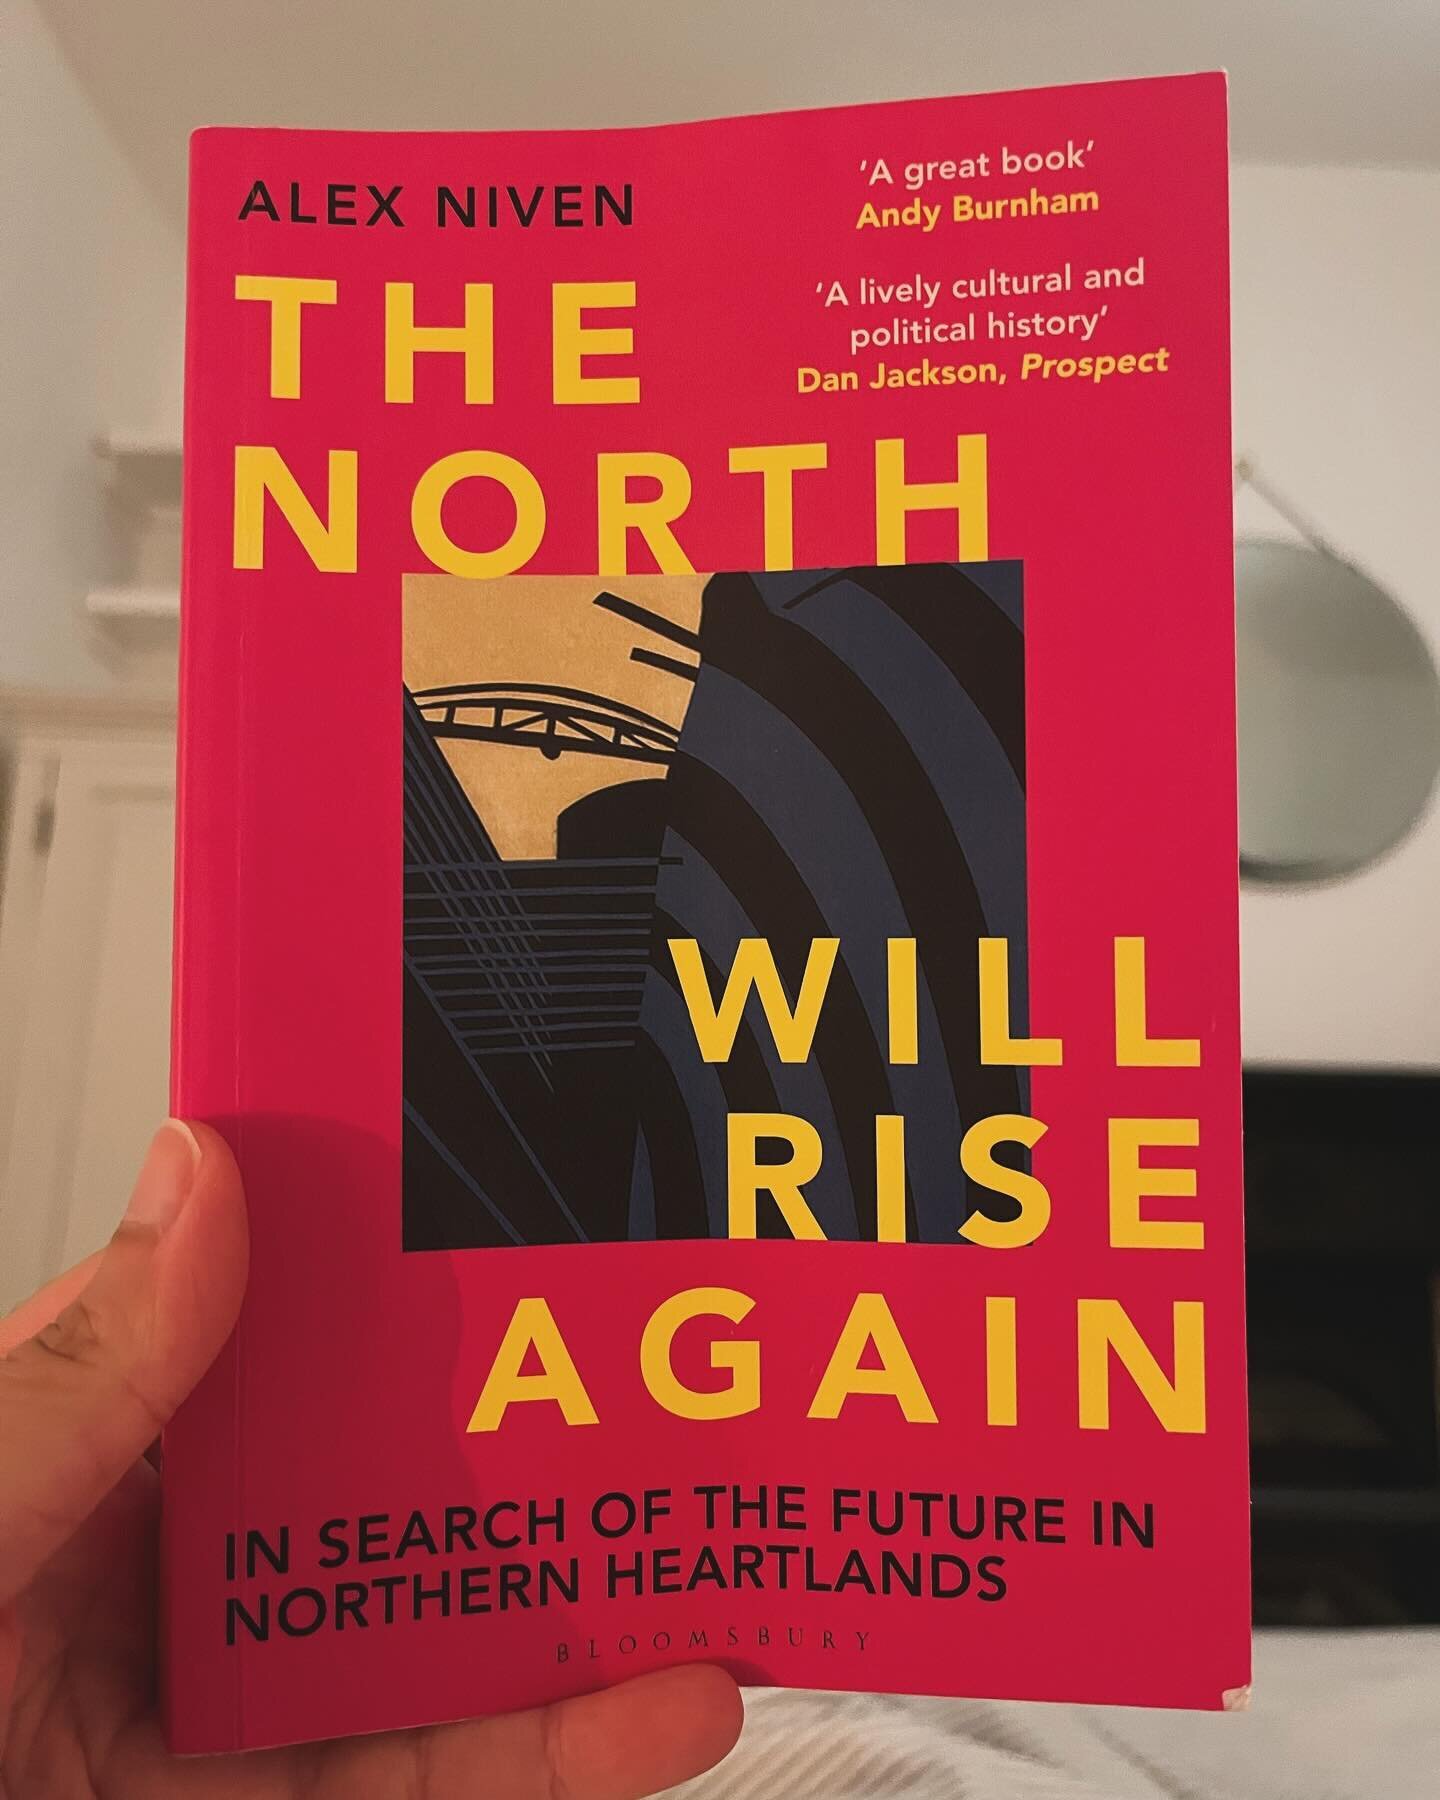 Reading this absolutely wonderful book by @alexnivenne. I&rsquo;m only a few chapters in, but there&rsquo;s some breathtaking descriptions (the geometric pod greenhouse bit&hellip;). It draws heavily (so far) on my (adopted, illegitimately claimed, d